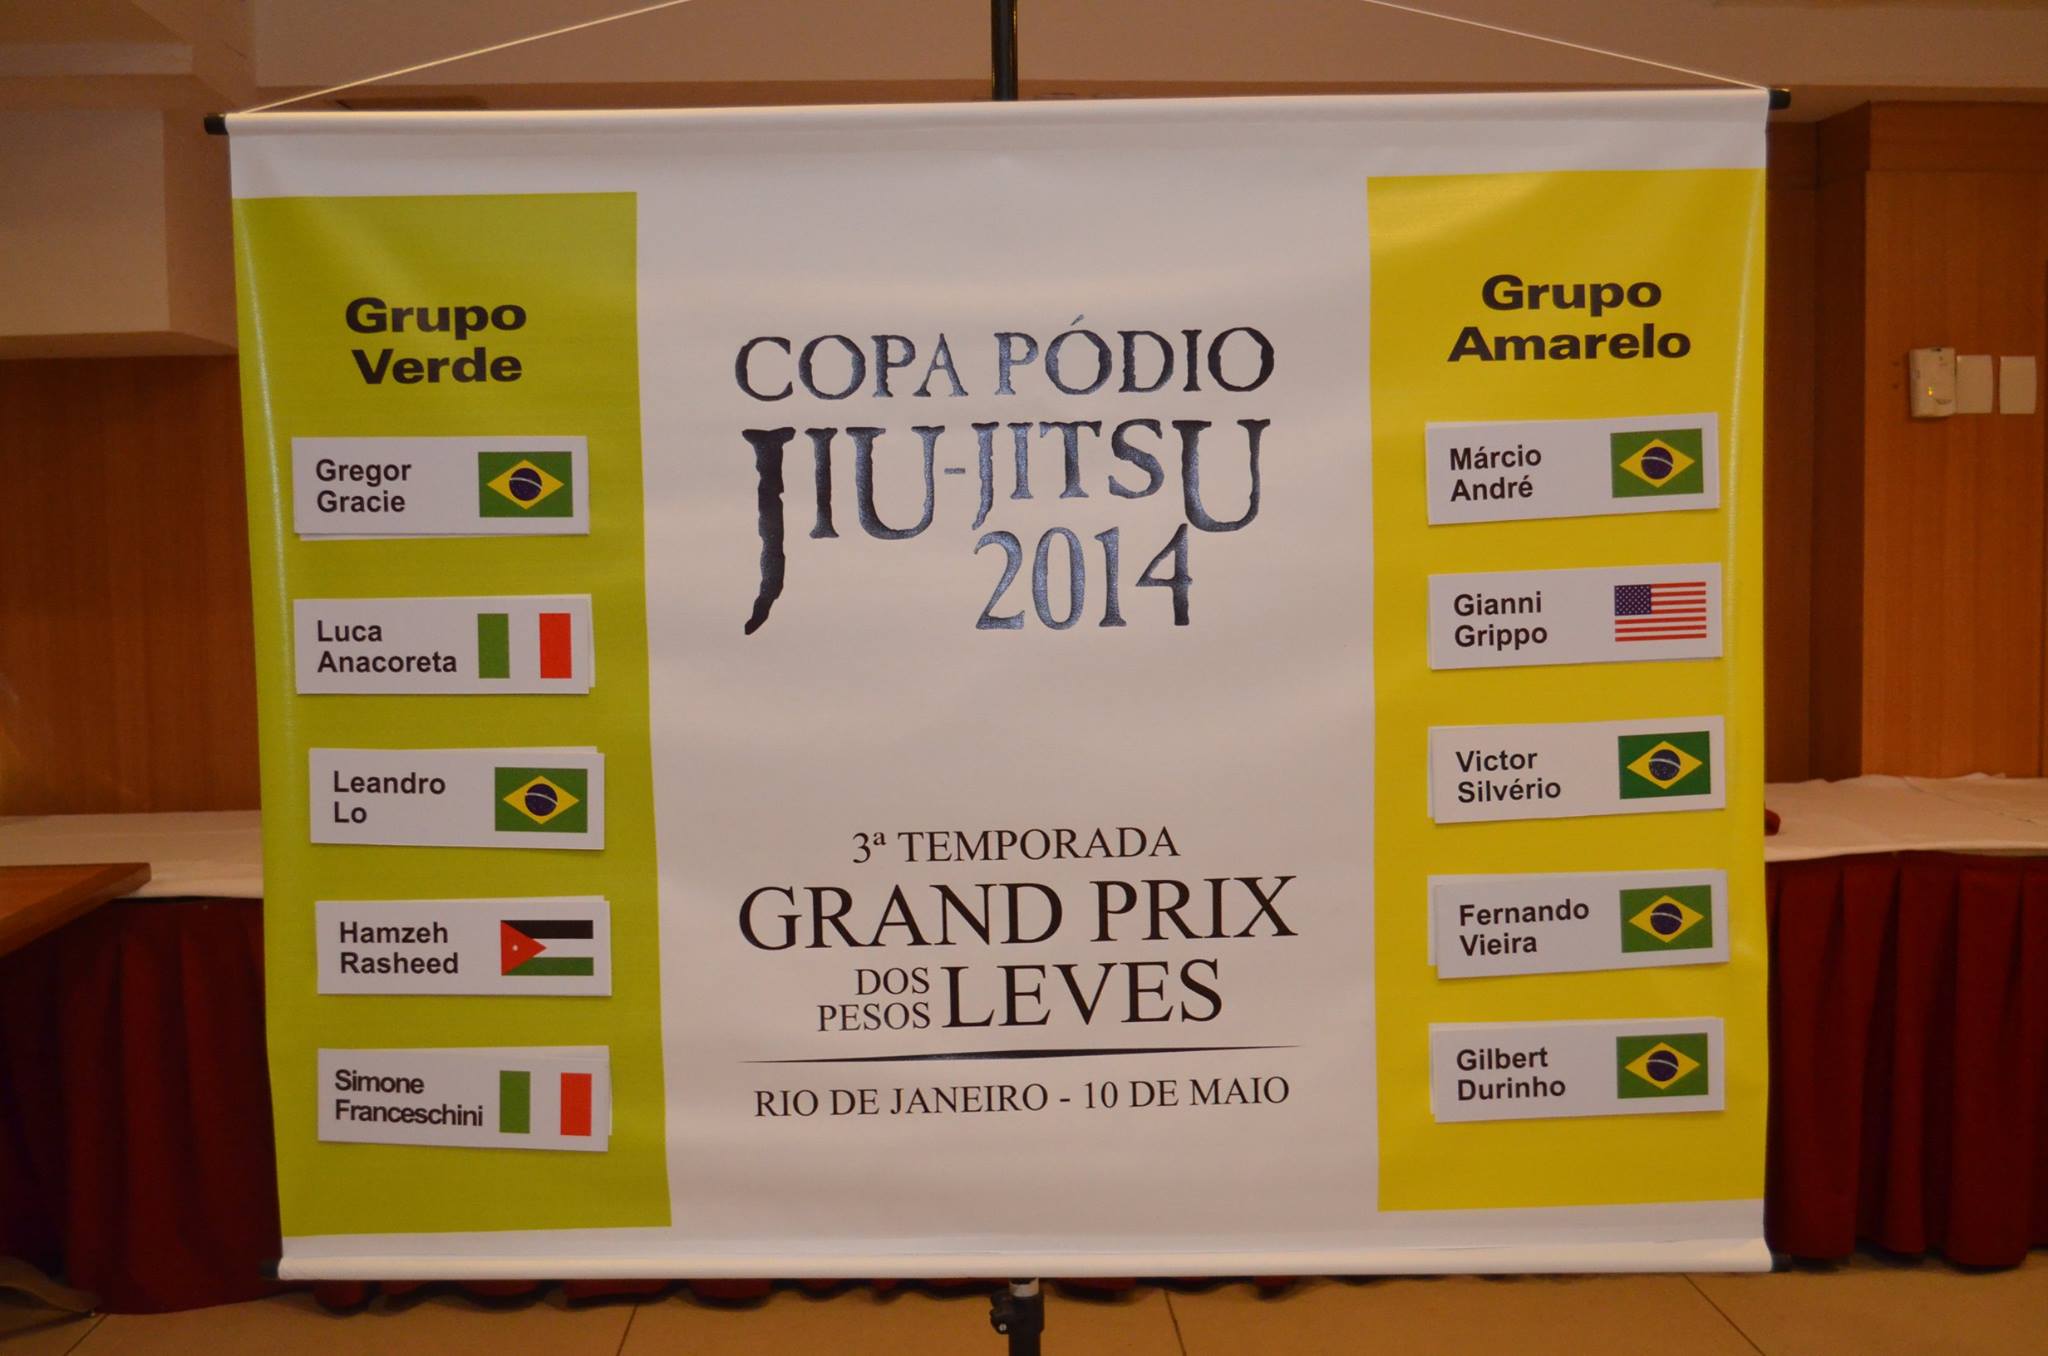 Check Out The Complete Lineup Of The 2014 Copa Podio Lightweight GP